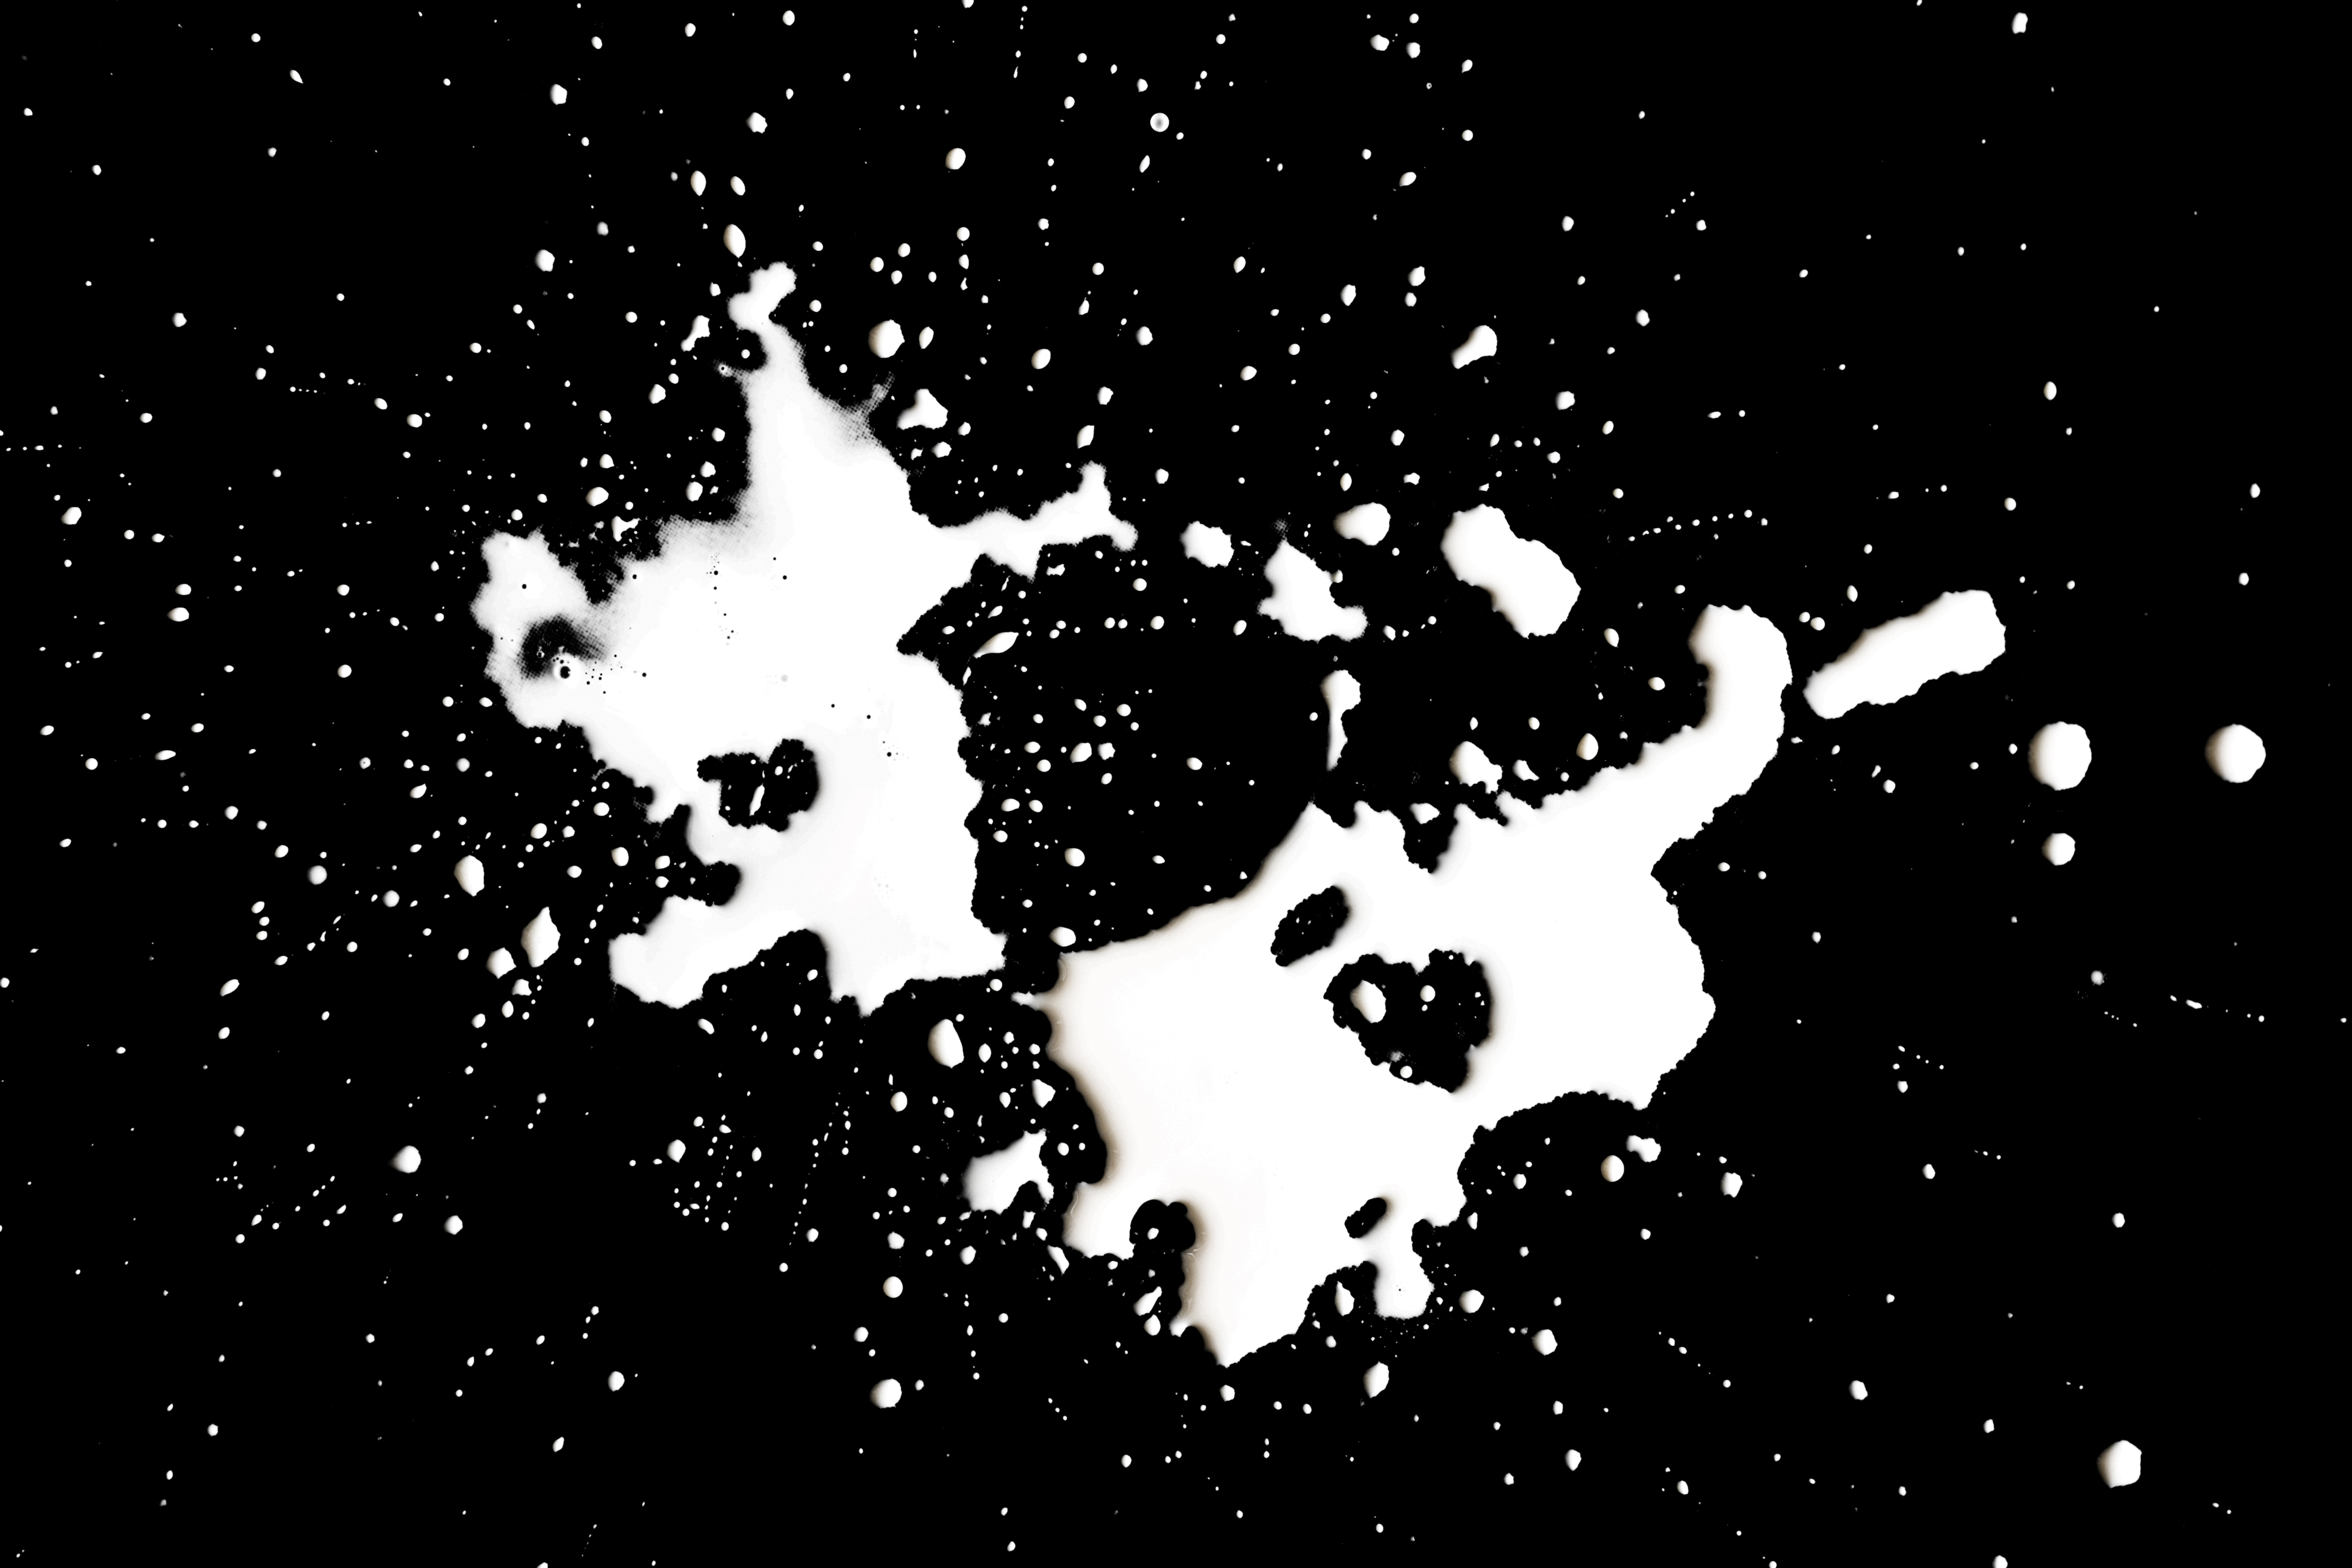 spots, abstract, black, drops, white, spray, stains, bw, chb